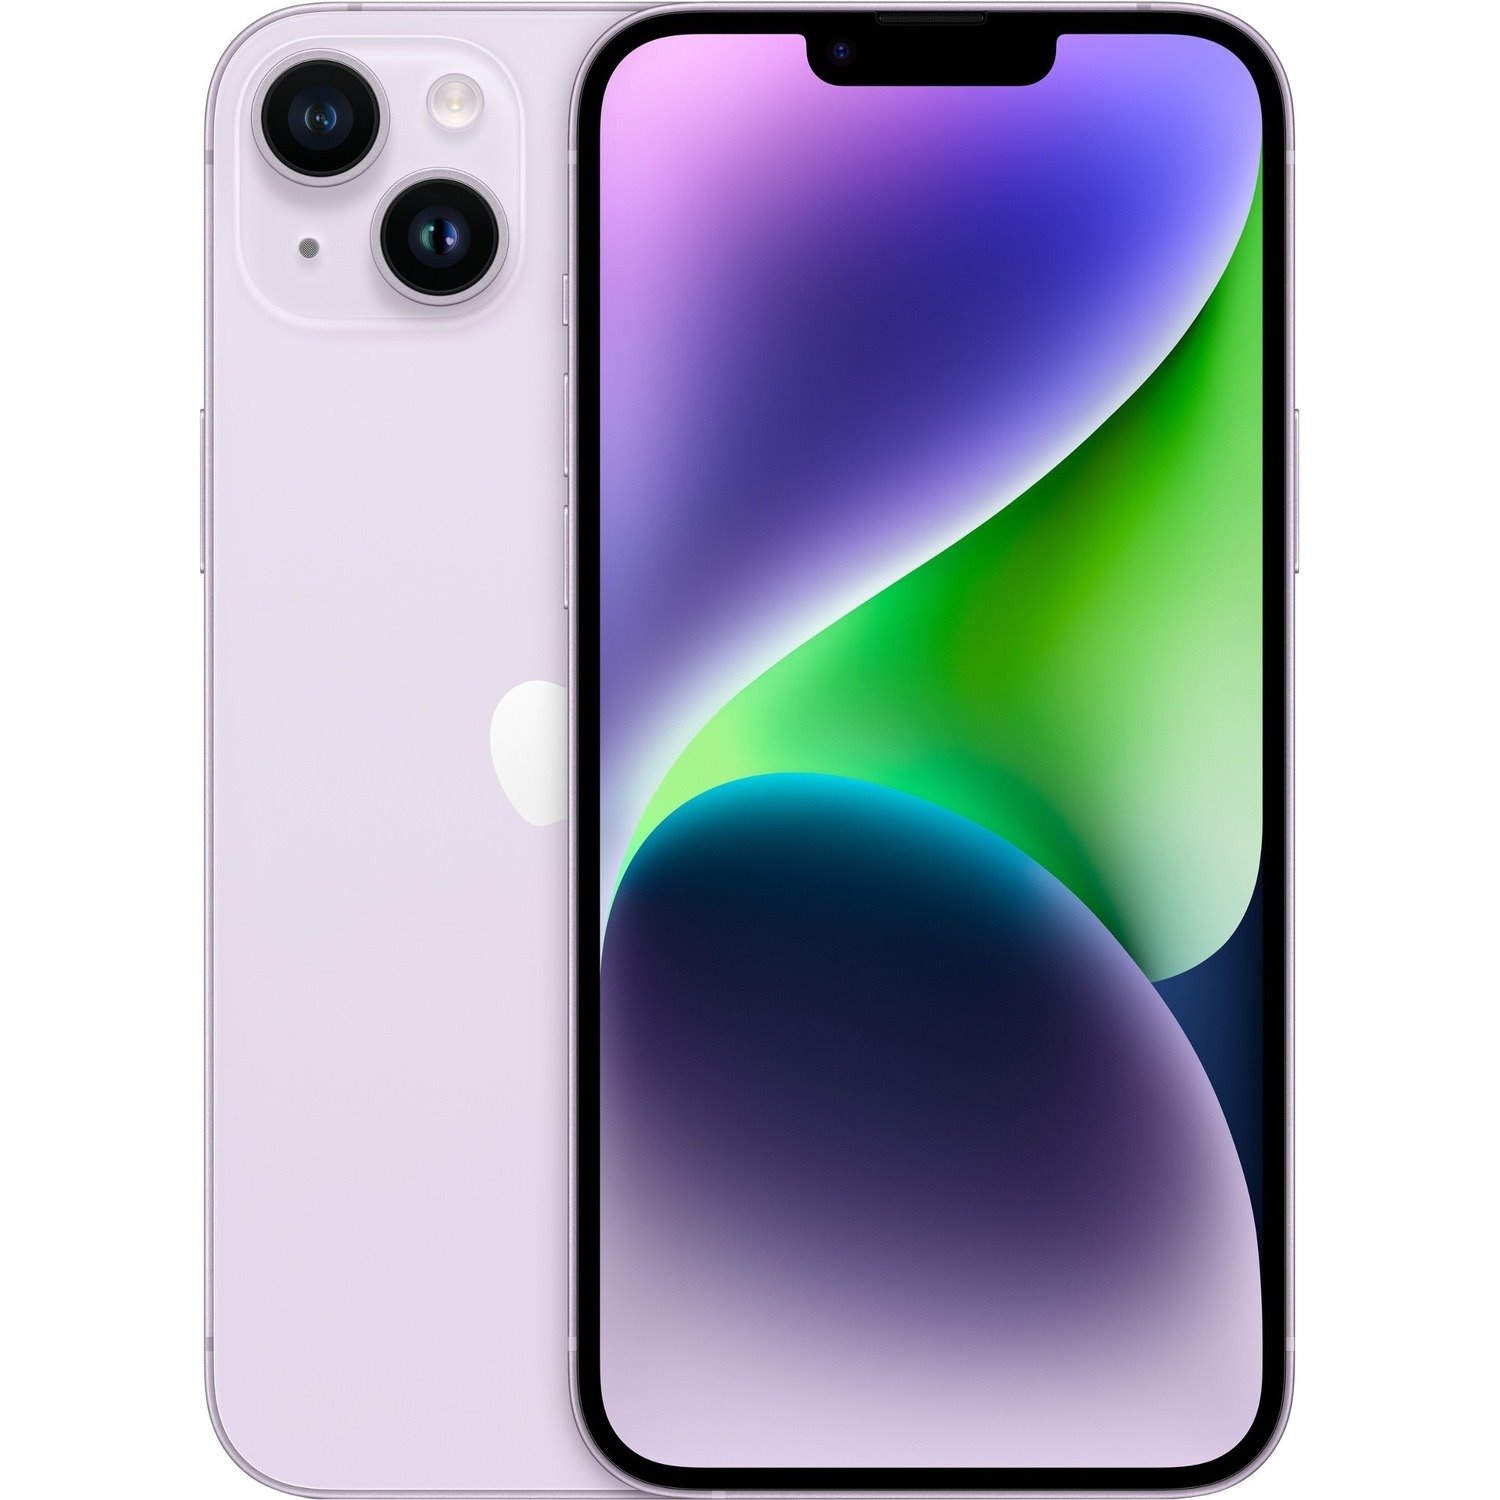 Apple iPhone 14 A2881 128 GB Smartphone - 6.1" OLED 2532 x 1170 - Hexa-core (AvalancheDual-core (2 Core) 3.23 GHz + Blizzard Quad-core (4 Core) 1.82 GHz - 6 GB RAM - iOS 16 - 5G - Purple